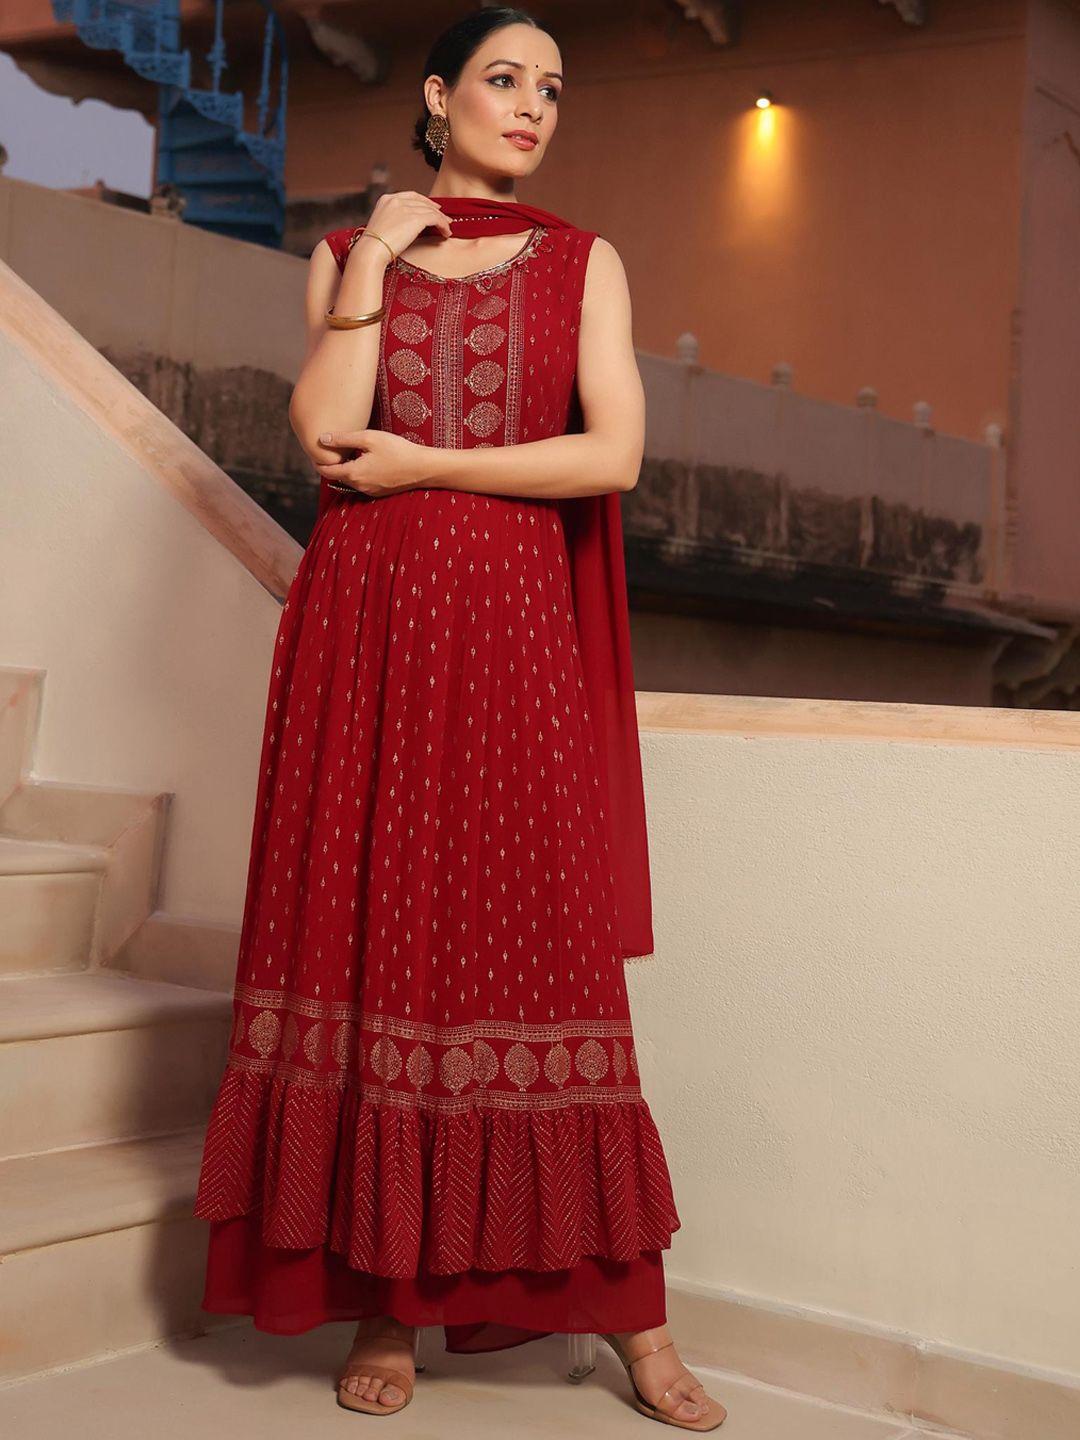 scakhi-women-maroon-ethnic-motifs-printed-pleated-beads-and-stones-kurta-with-palazzos-&-with-dupatta